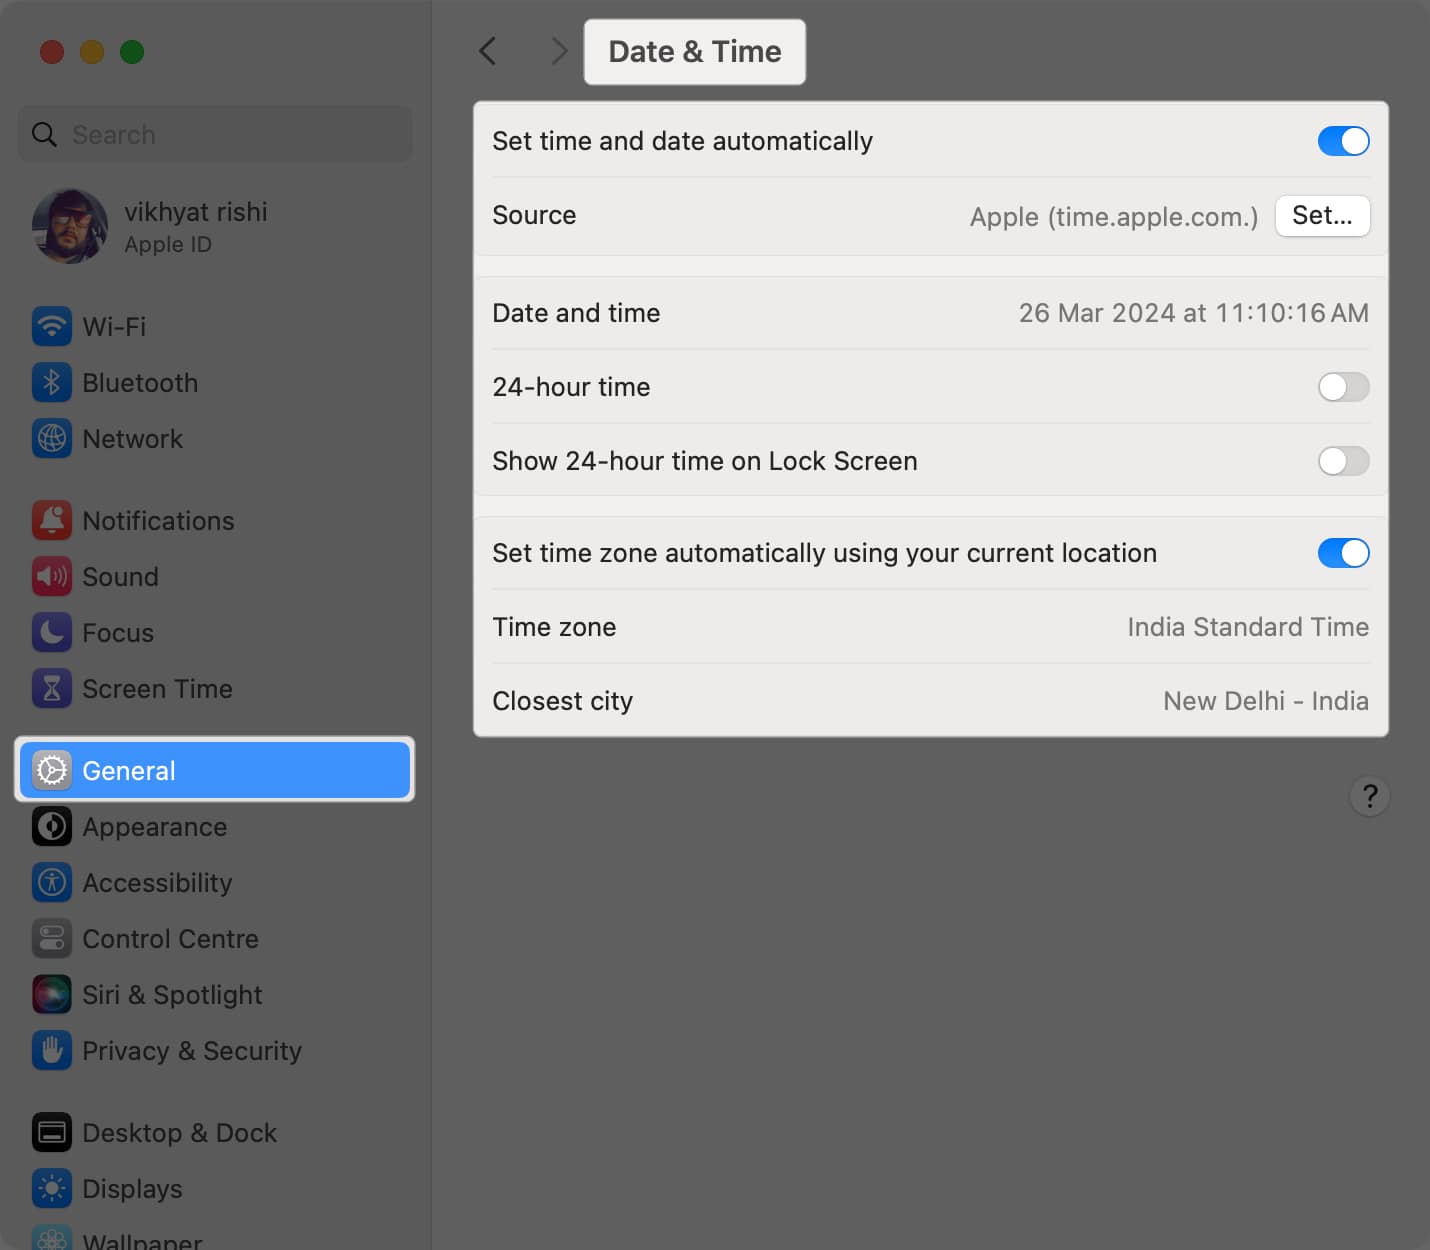 Go to General and check for the Date and time settings on your Mac